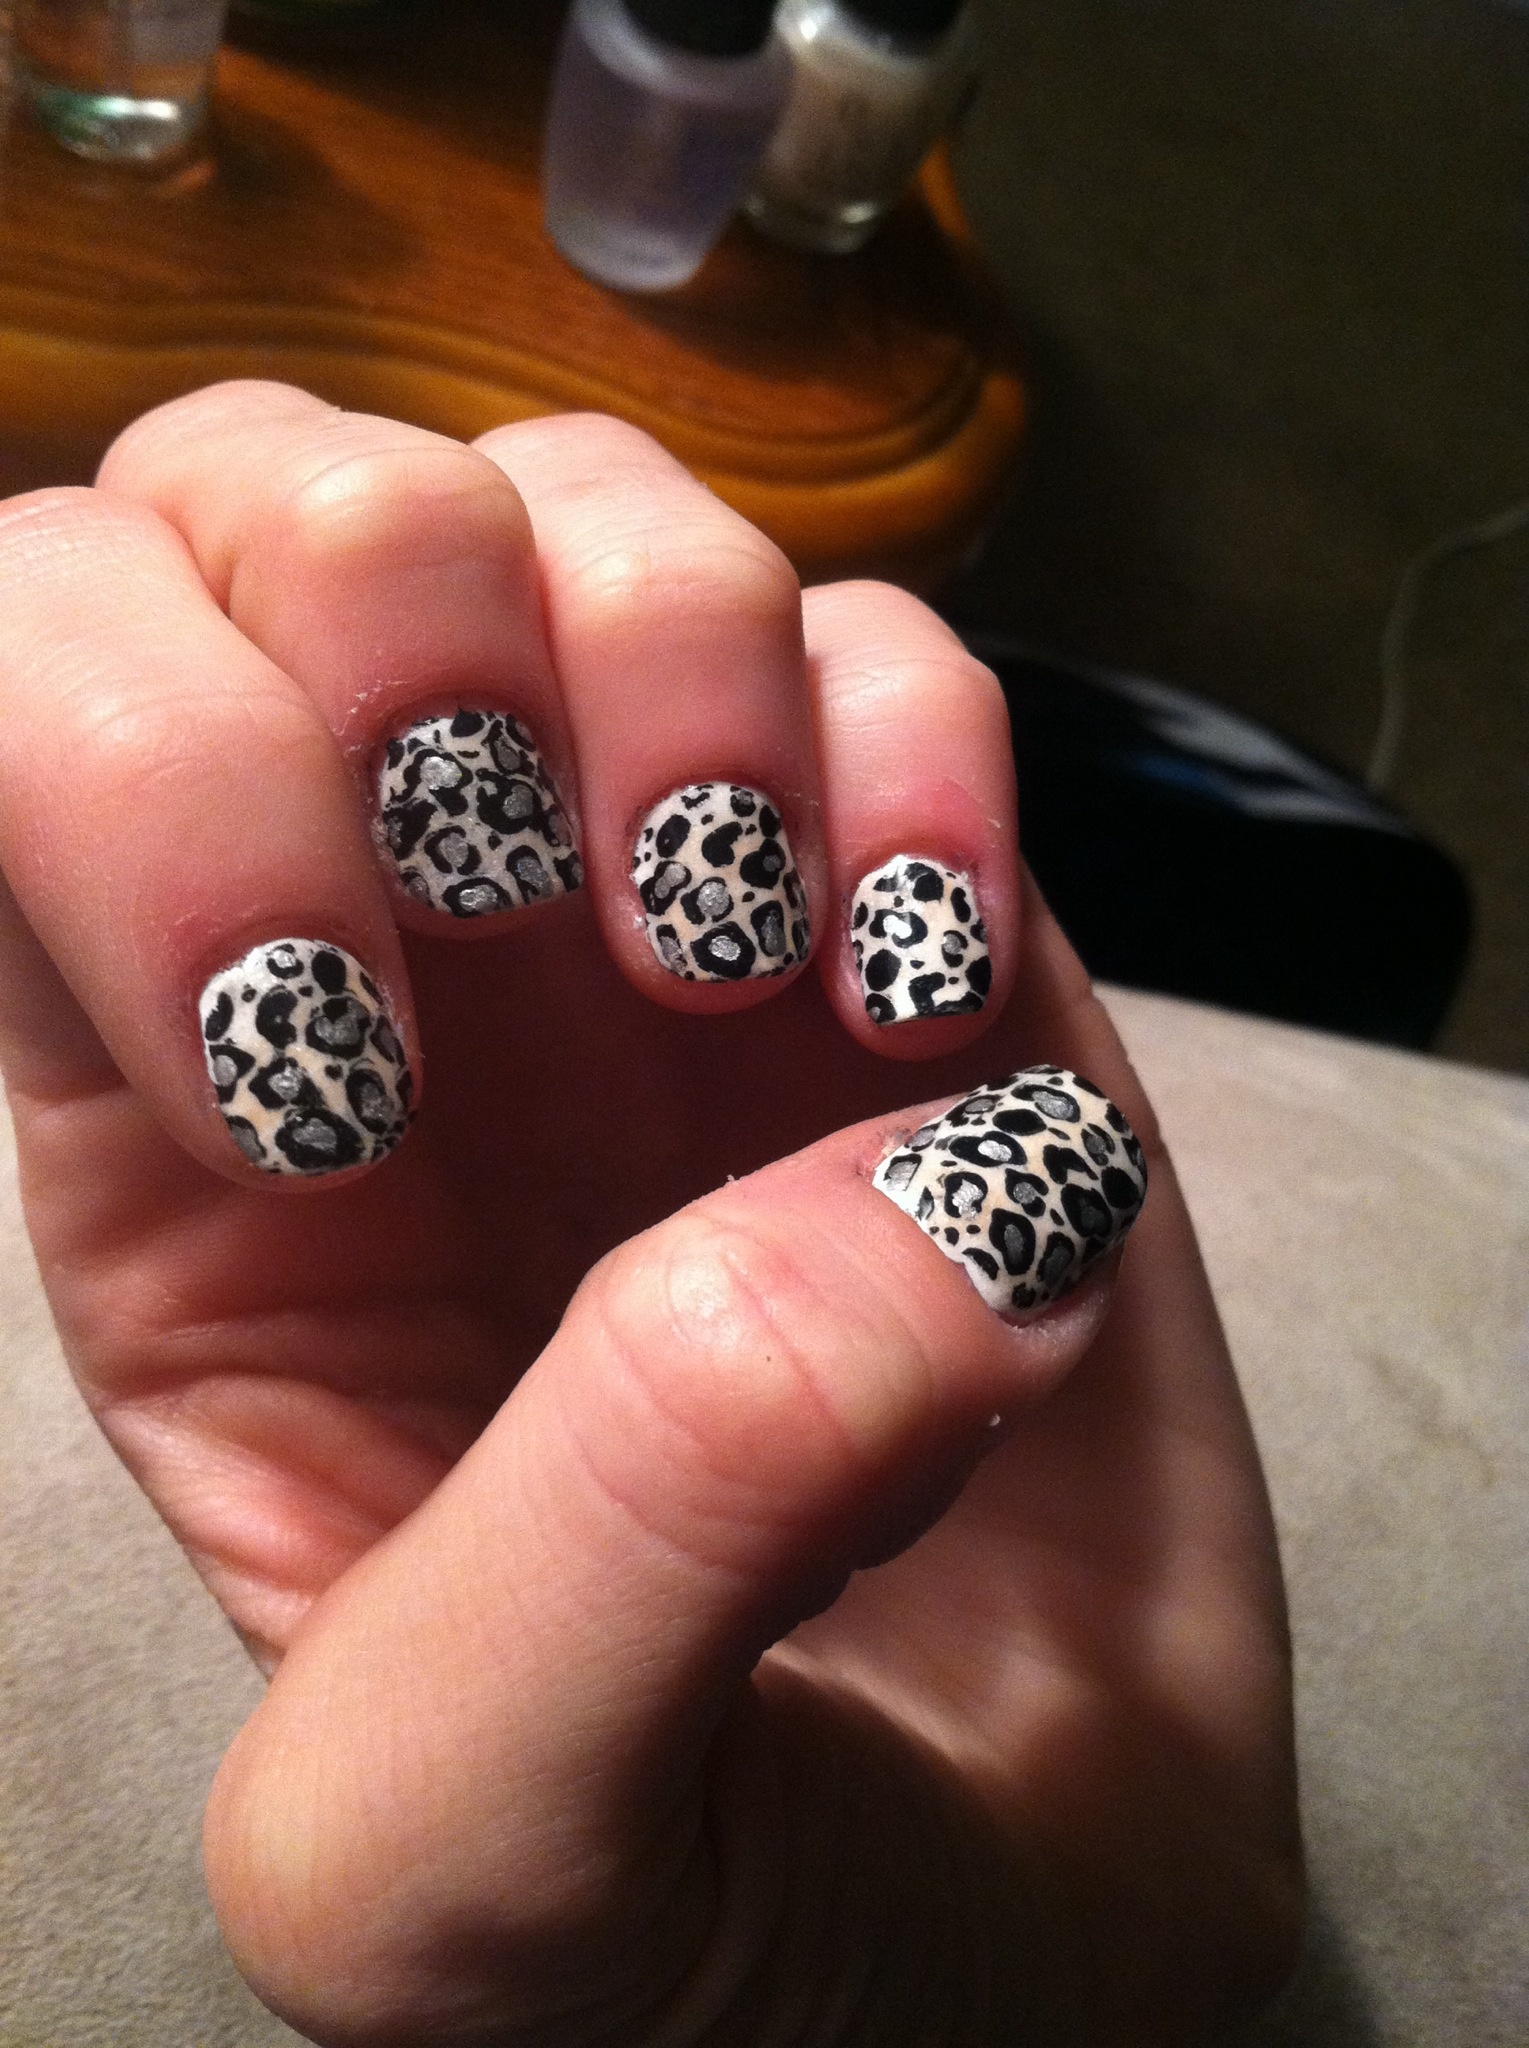 How to do snow leopard nail art - B+C Guides